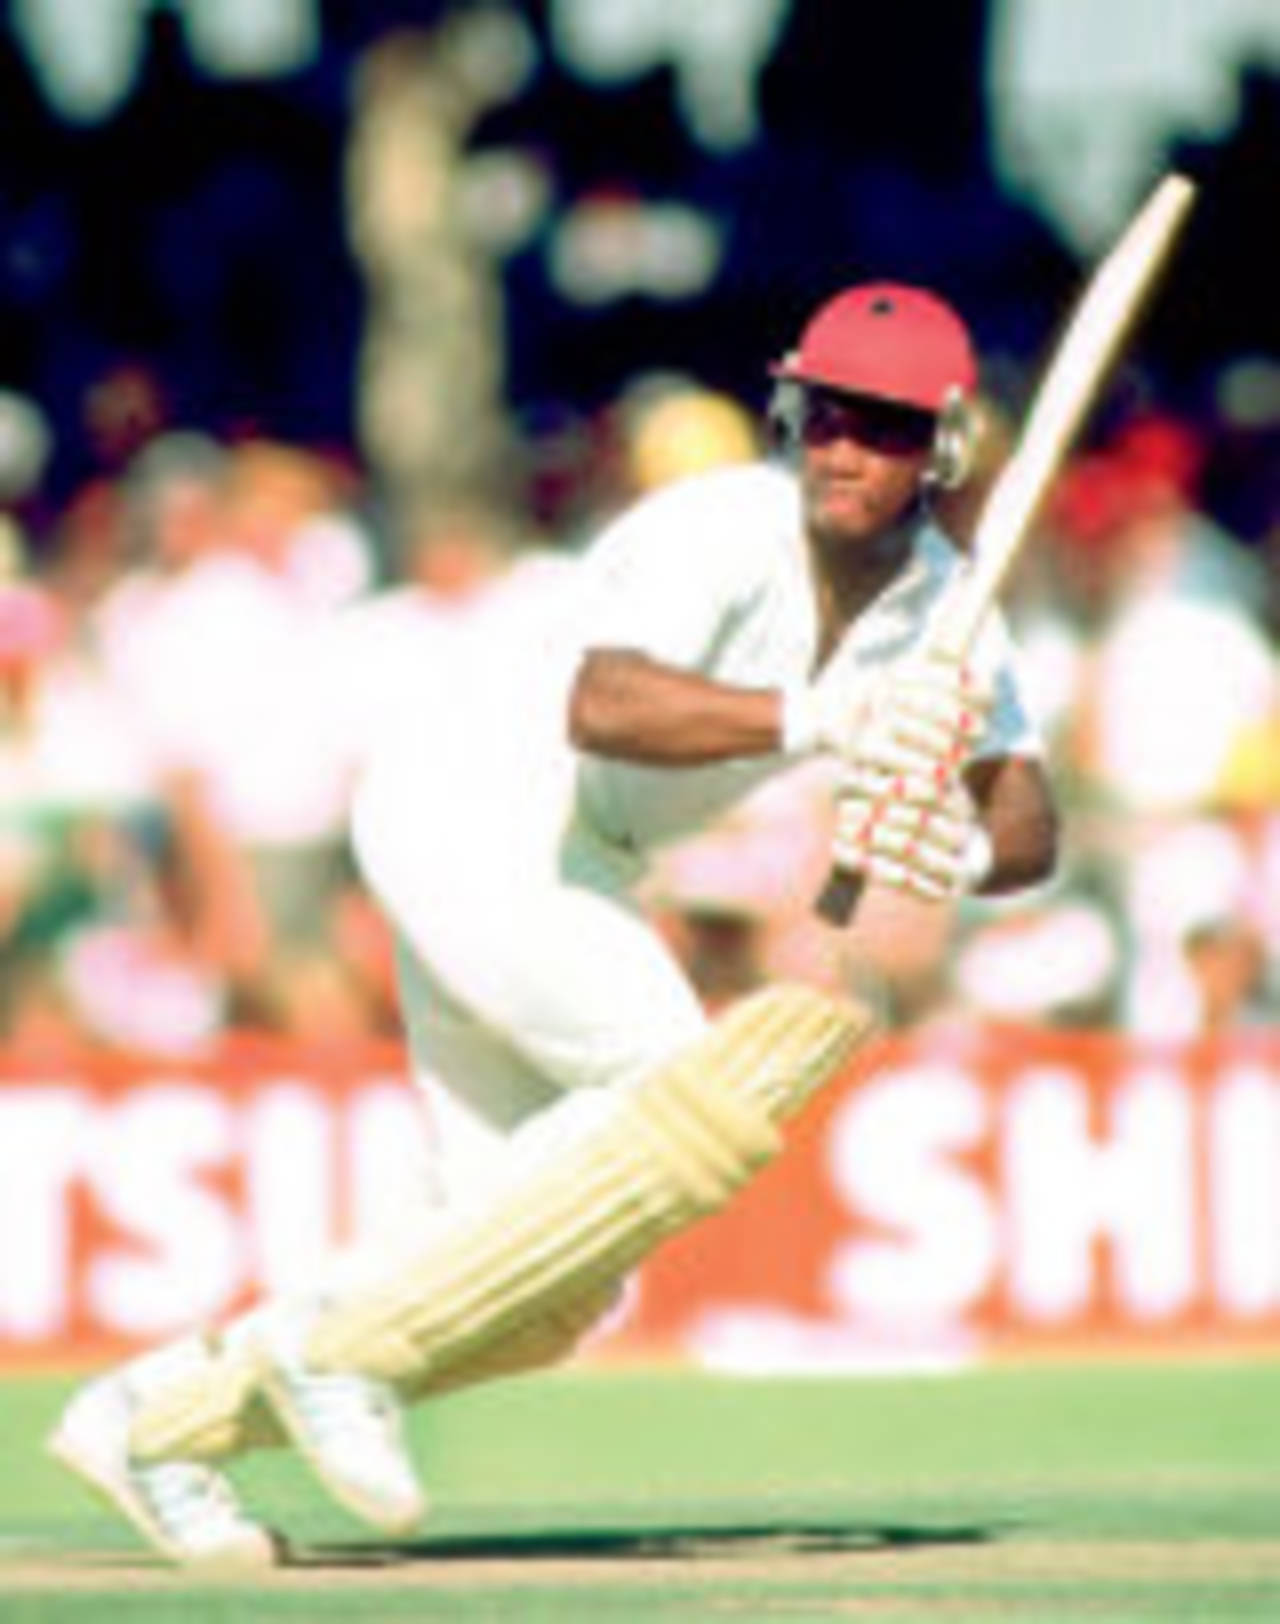 Emmerson Trotman batting at Cape Town during the West Indies rebel tour of South Africa, January 15, 1983